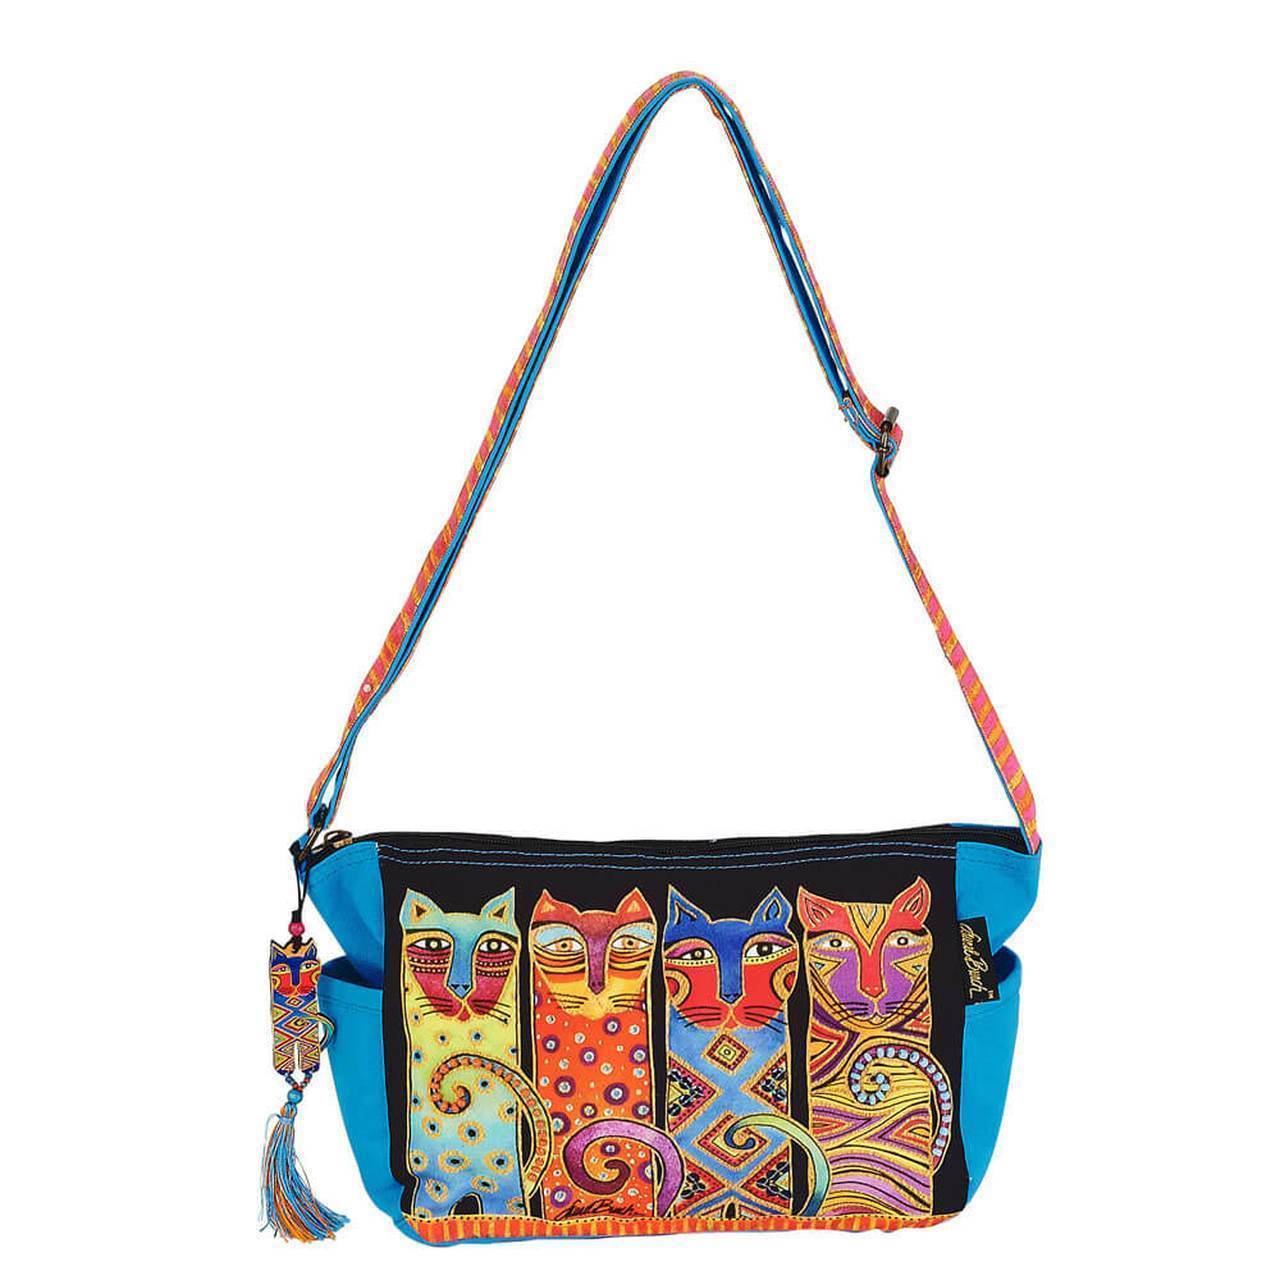 Purses With Cats On Them, Cat Crossbody Purse Featuring An Adjustable Strap And Four Cats Printed On A Colorful Canvas Fabric